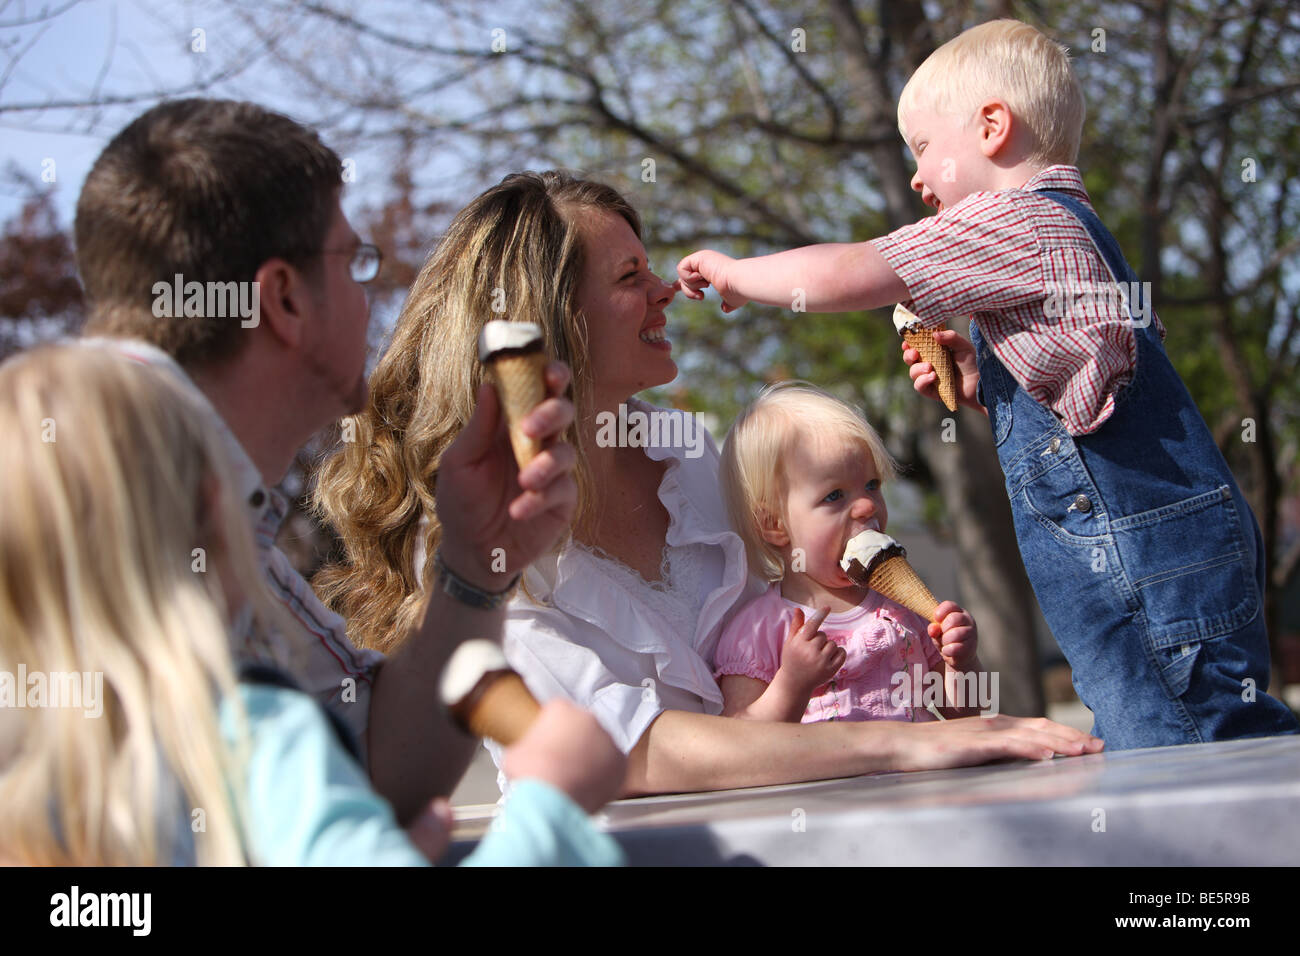 Family having ice cream cones together at park Stock Photo